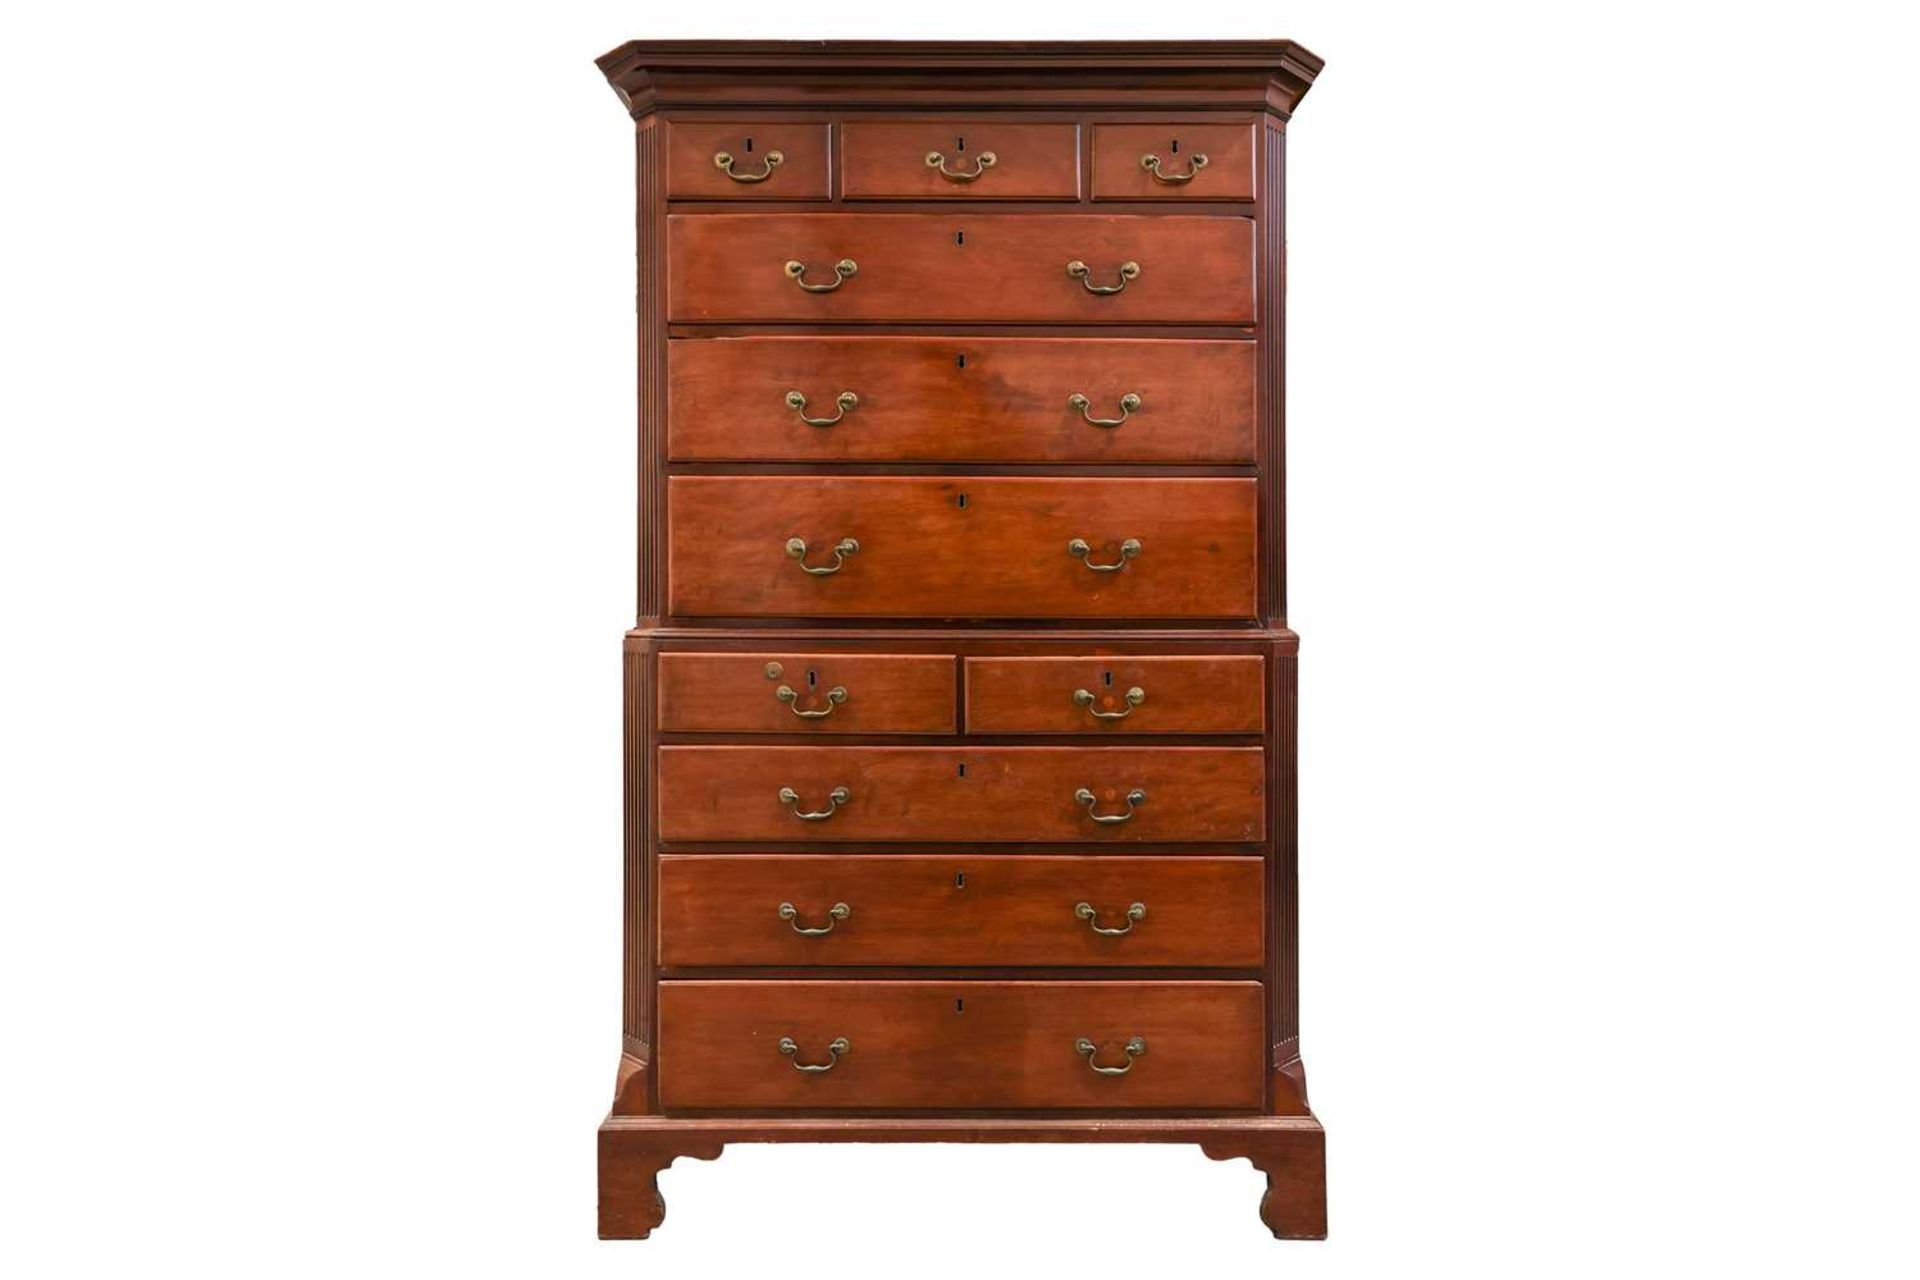 A George III mahogany chest on chest with canted and fluted corners, the upper carcass with three